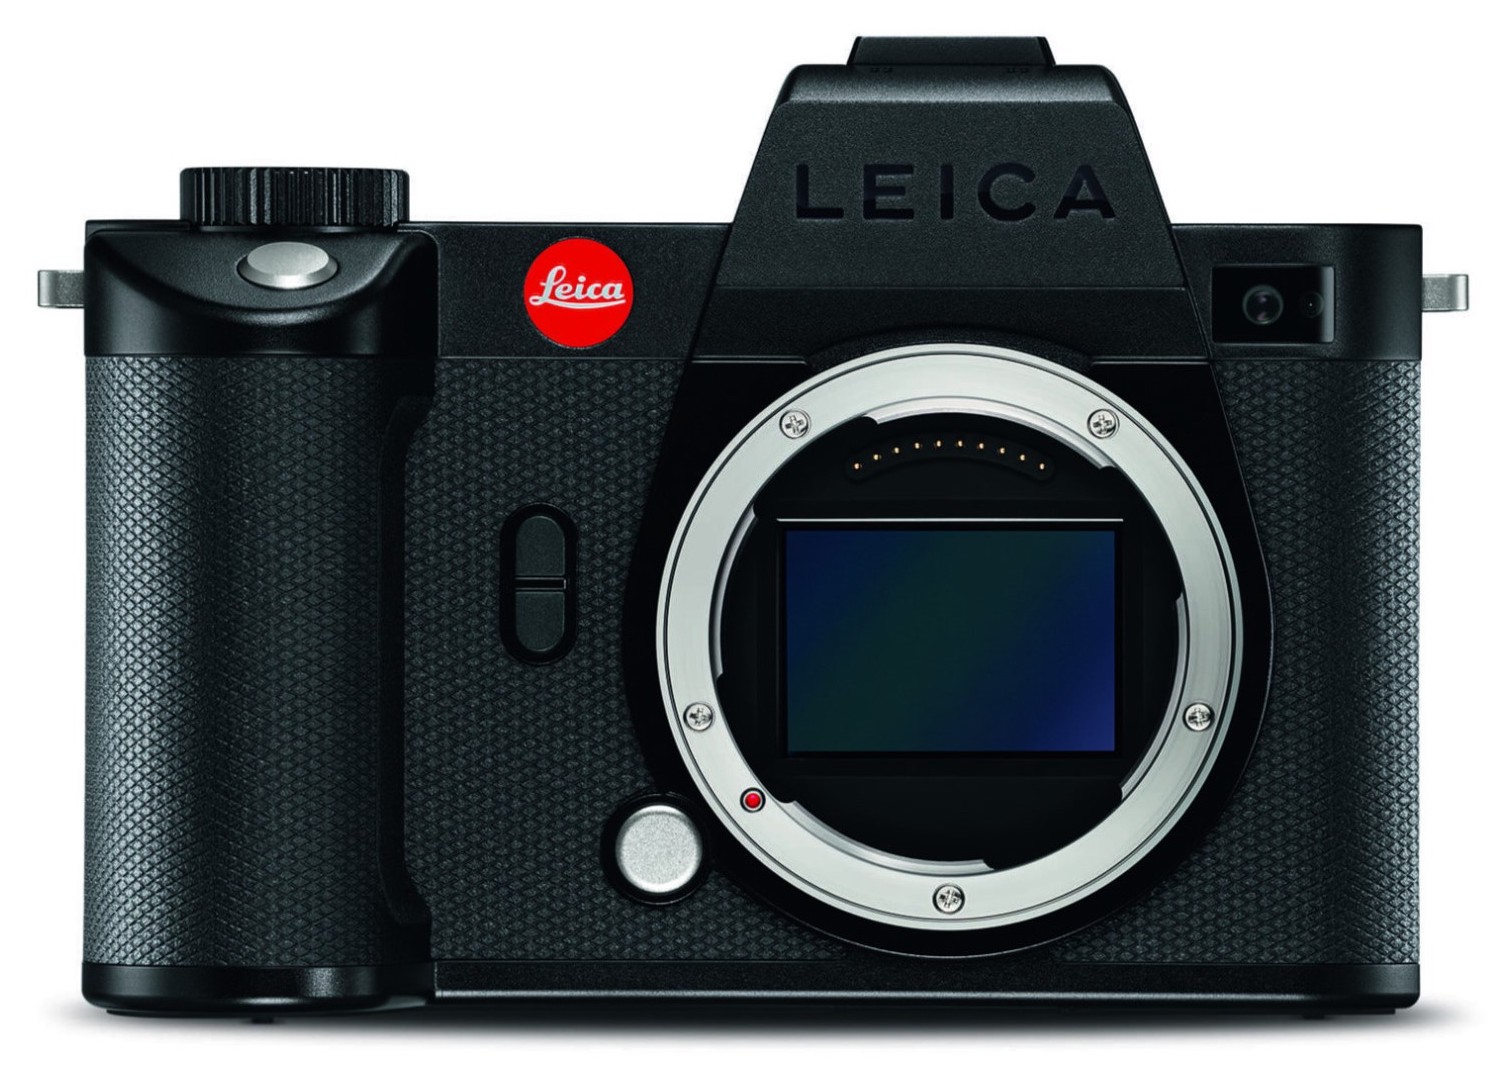 leica-sl2-s-camera-with-a-24-mp-sensor-coming-soon-new-leaked-photos